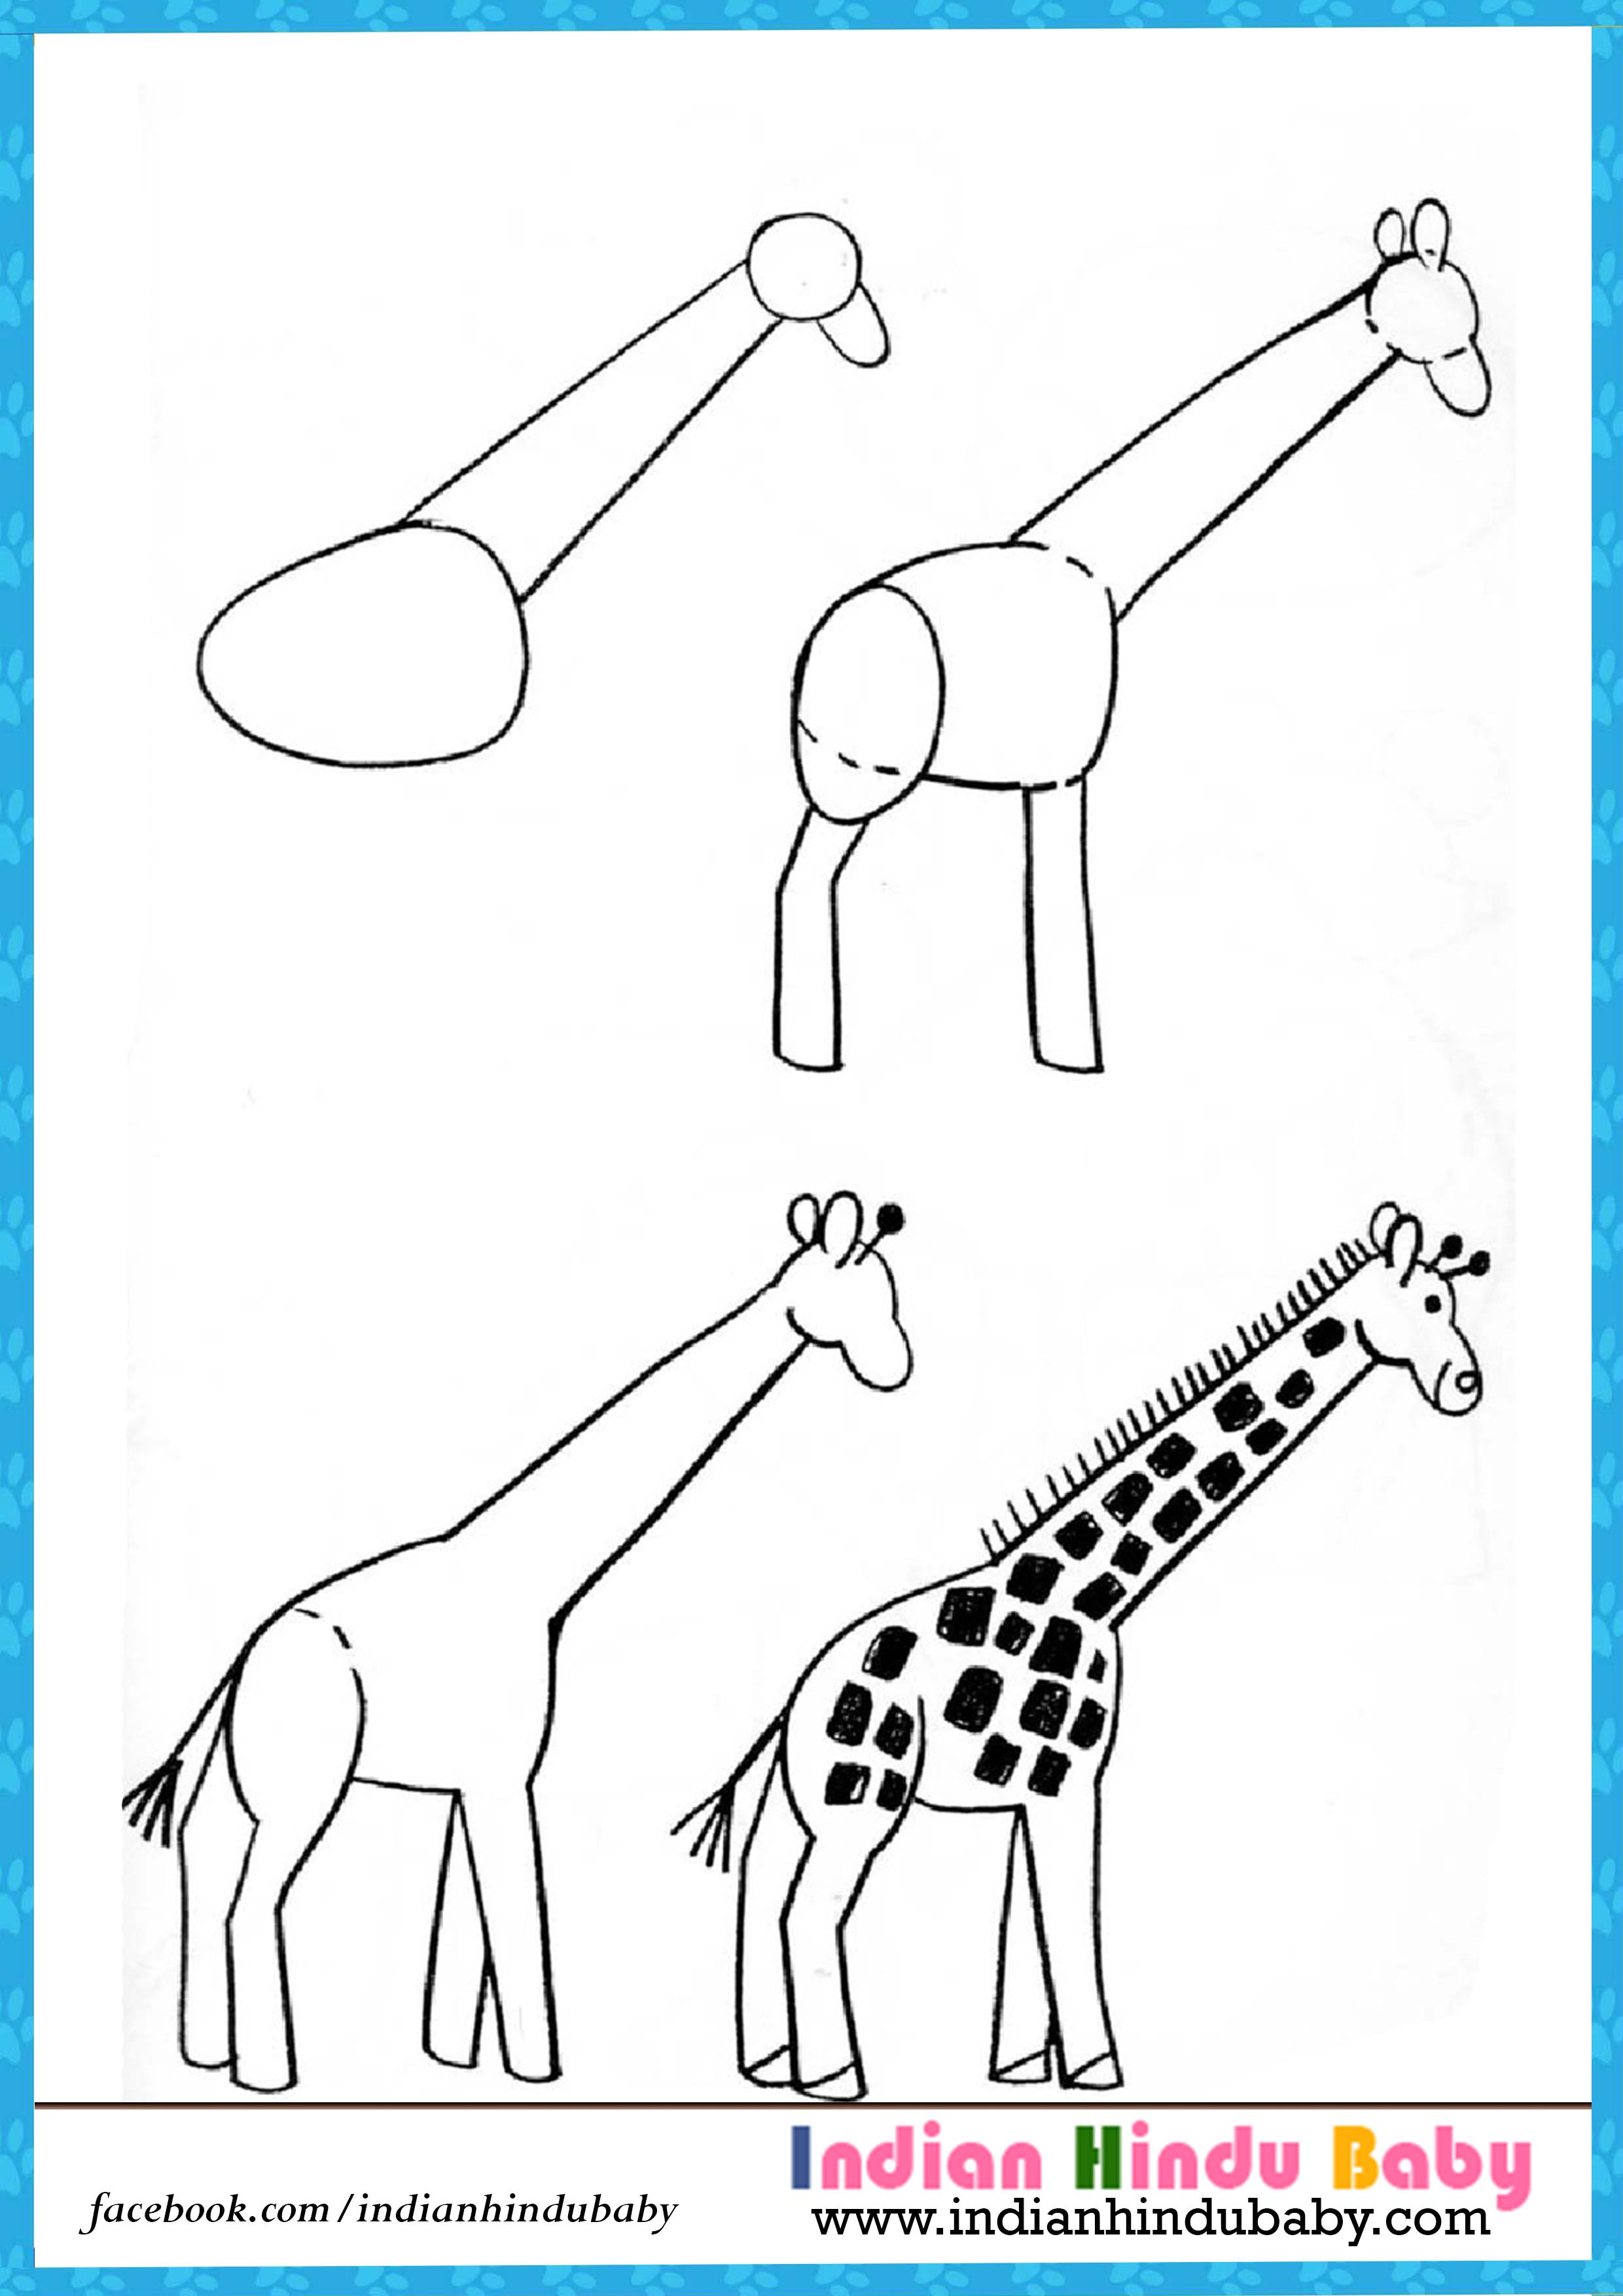 Giraffe step by step drawing for kids – Indian hindu baby